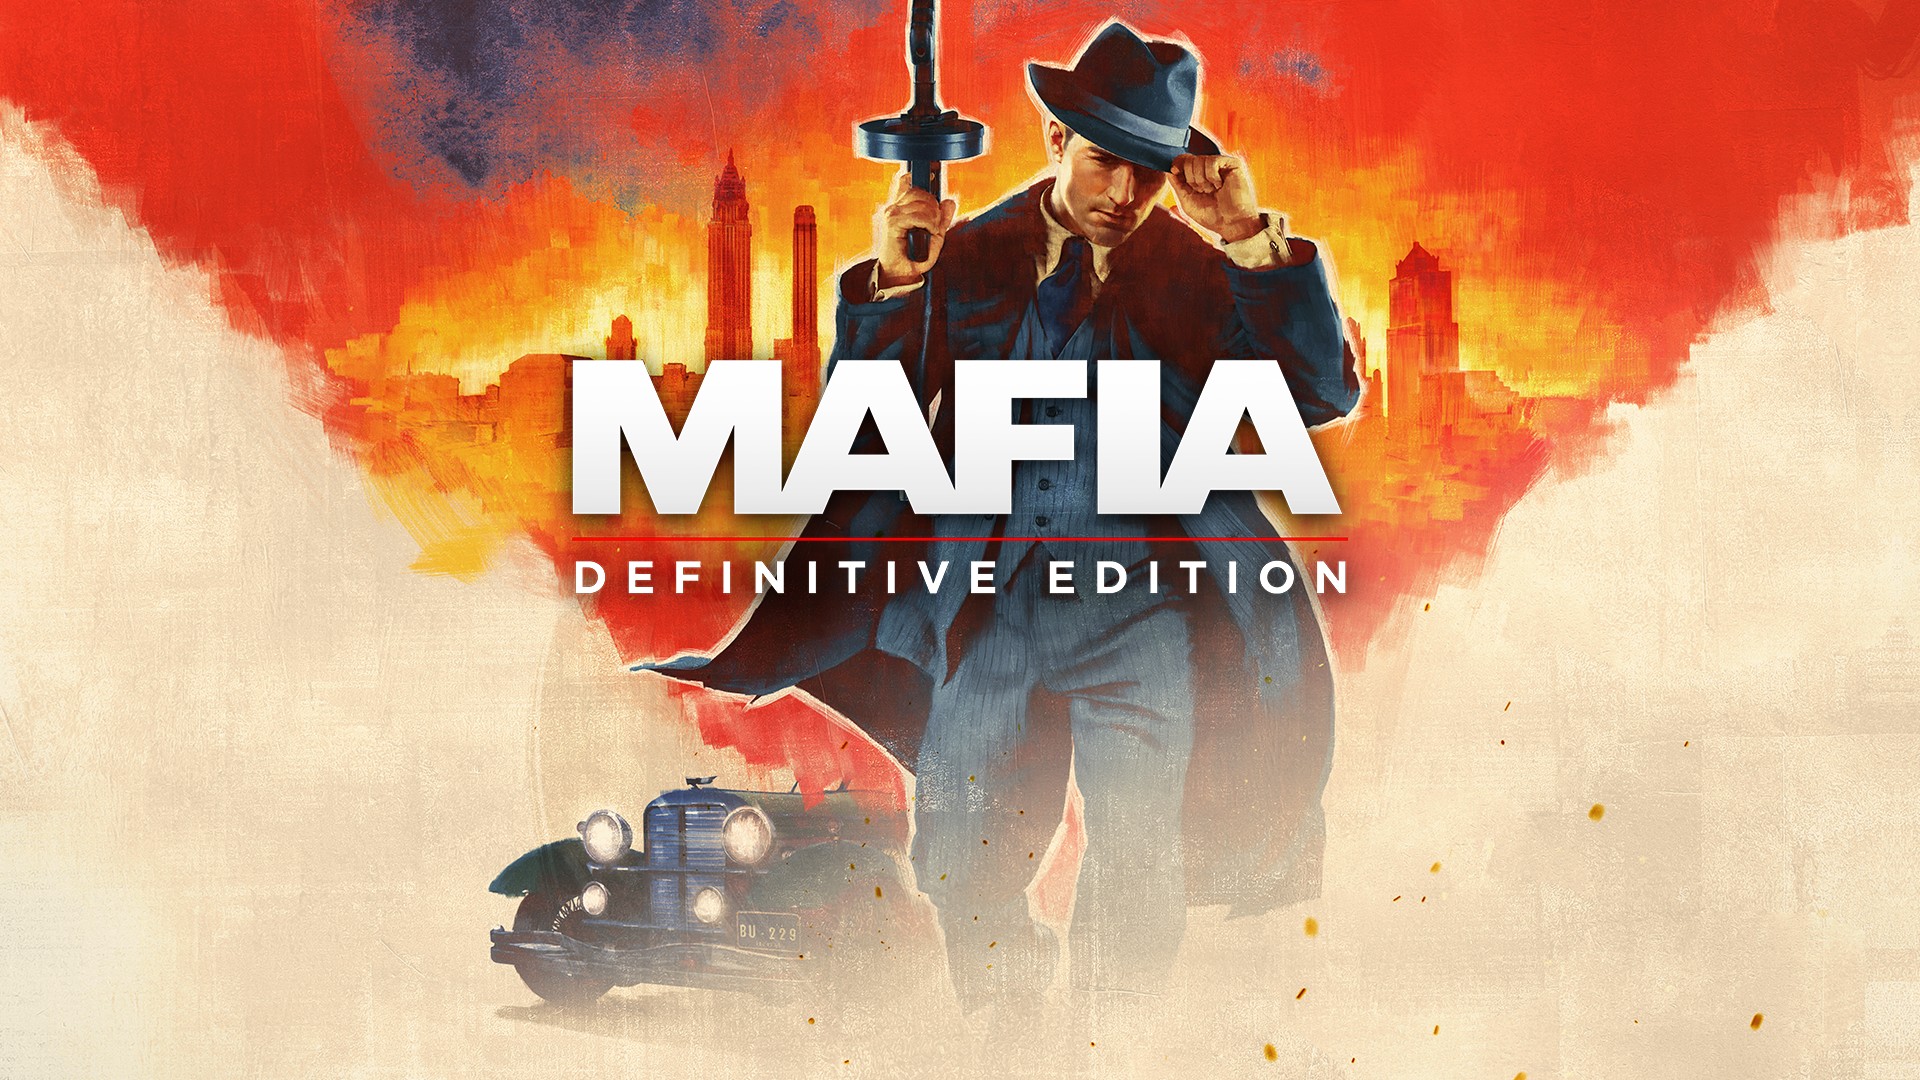 Mafia: Definitive Edition Available Now on Xbox One - Xbox Wire